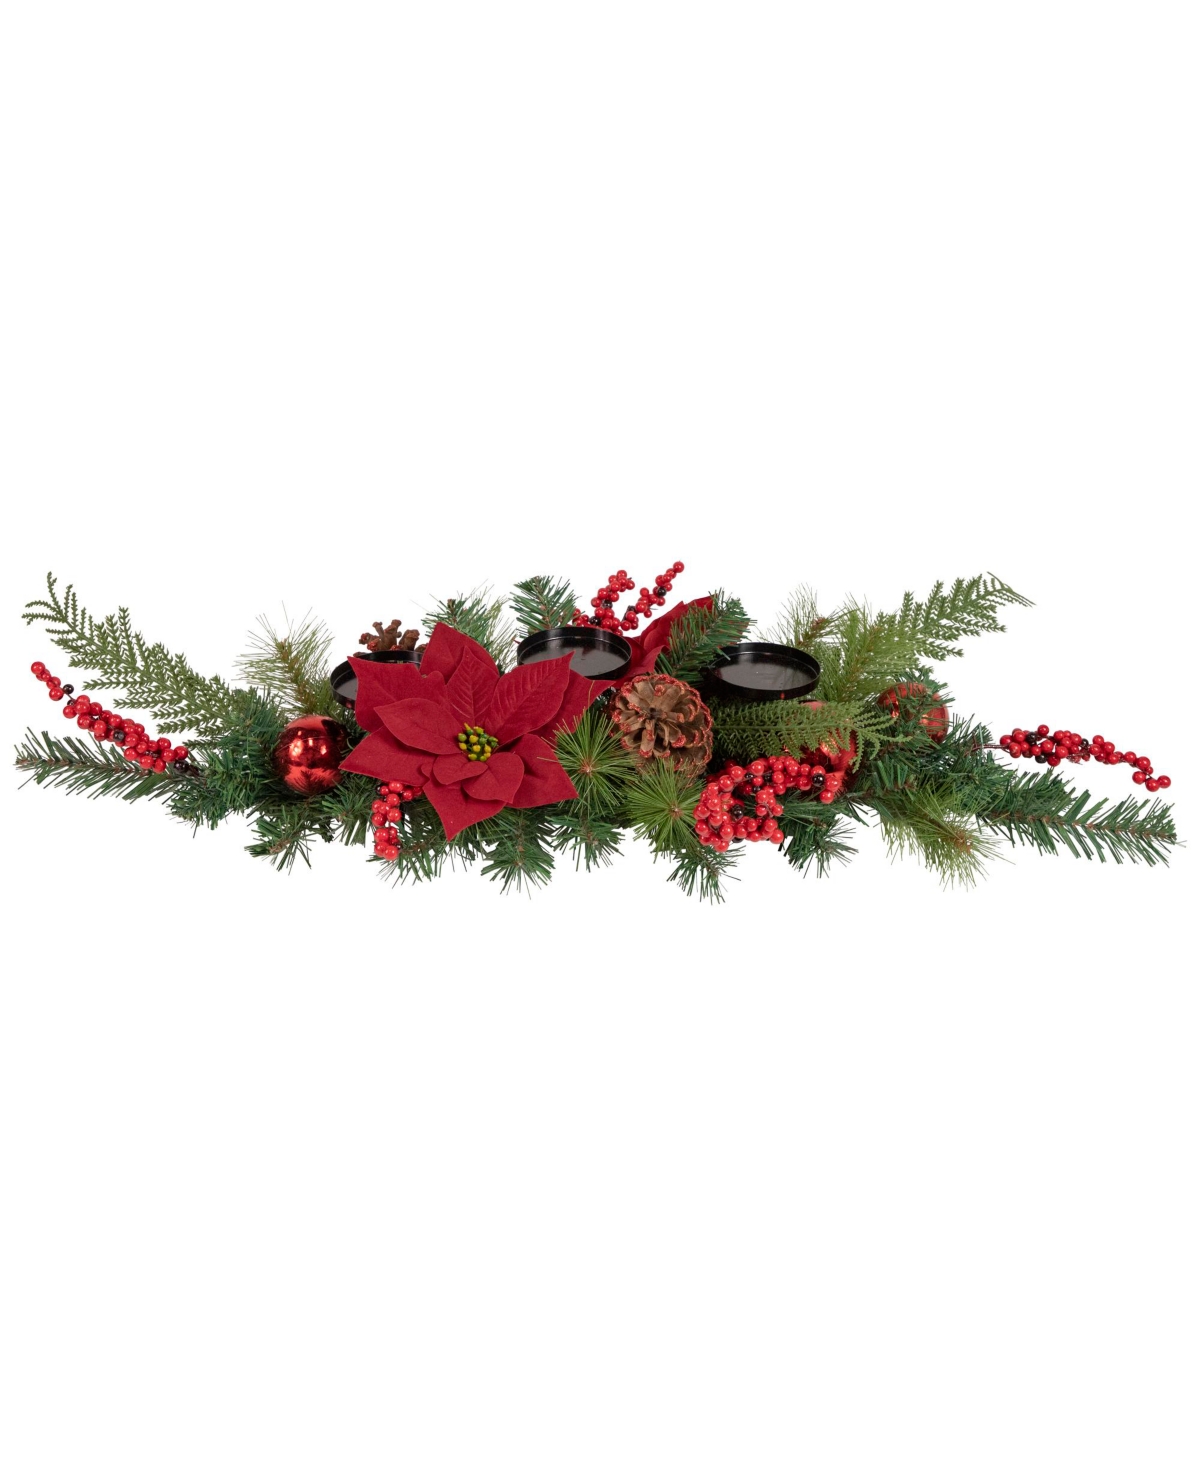 Artificial Mixed Pine Berries and Poinsettia Christmas Candle Holder Centerpiece, 32" - Green